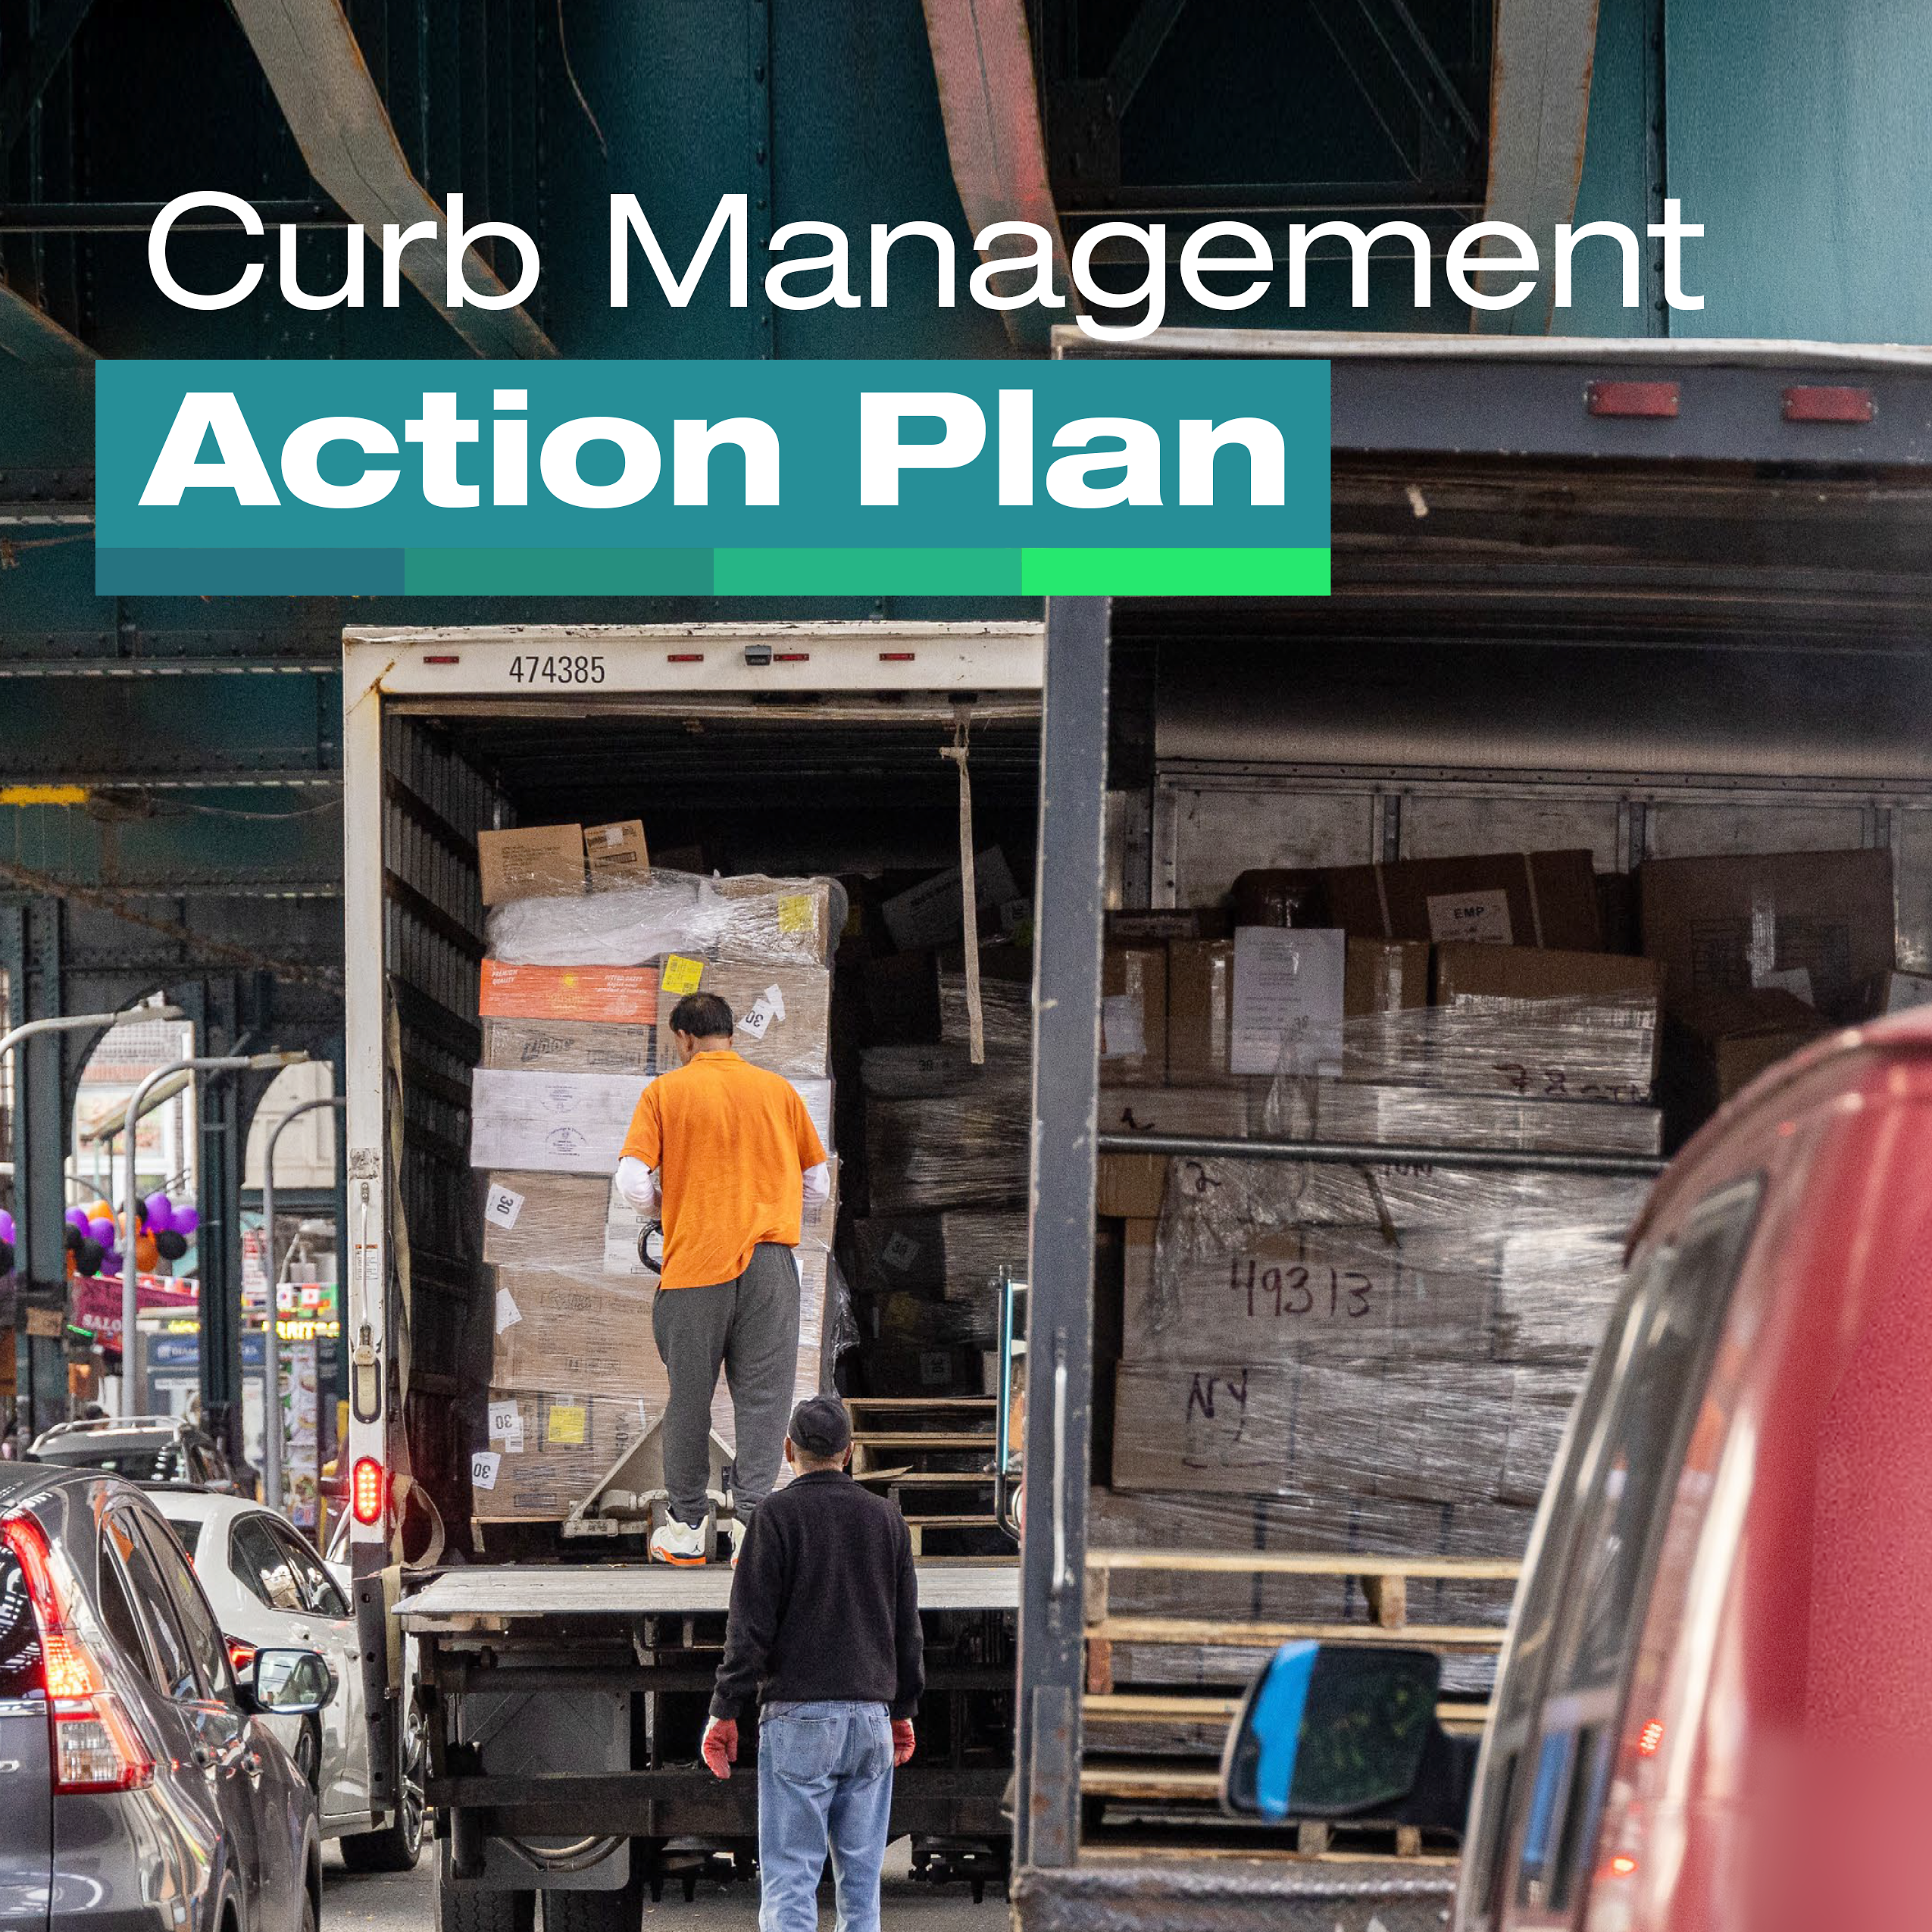 Curb Management Action Plan for Manhattan from NYC DOT